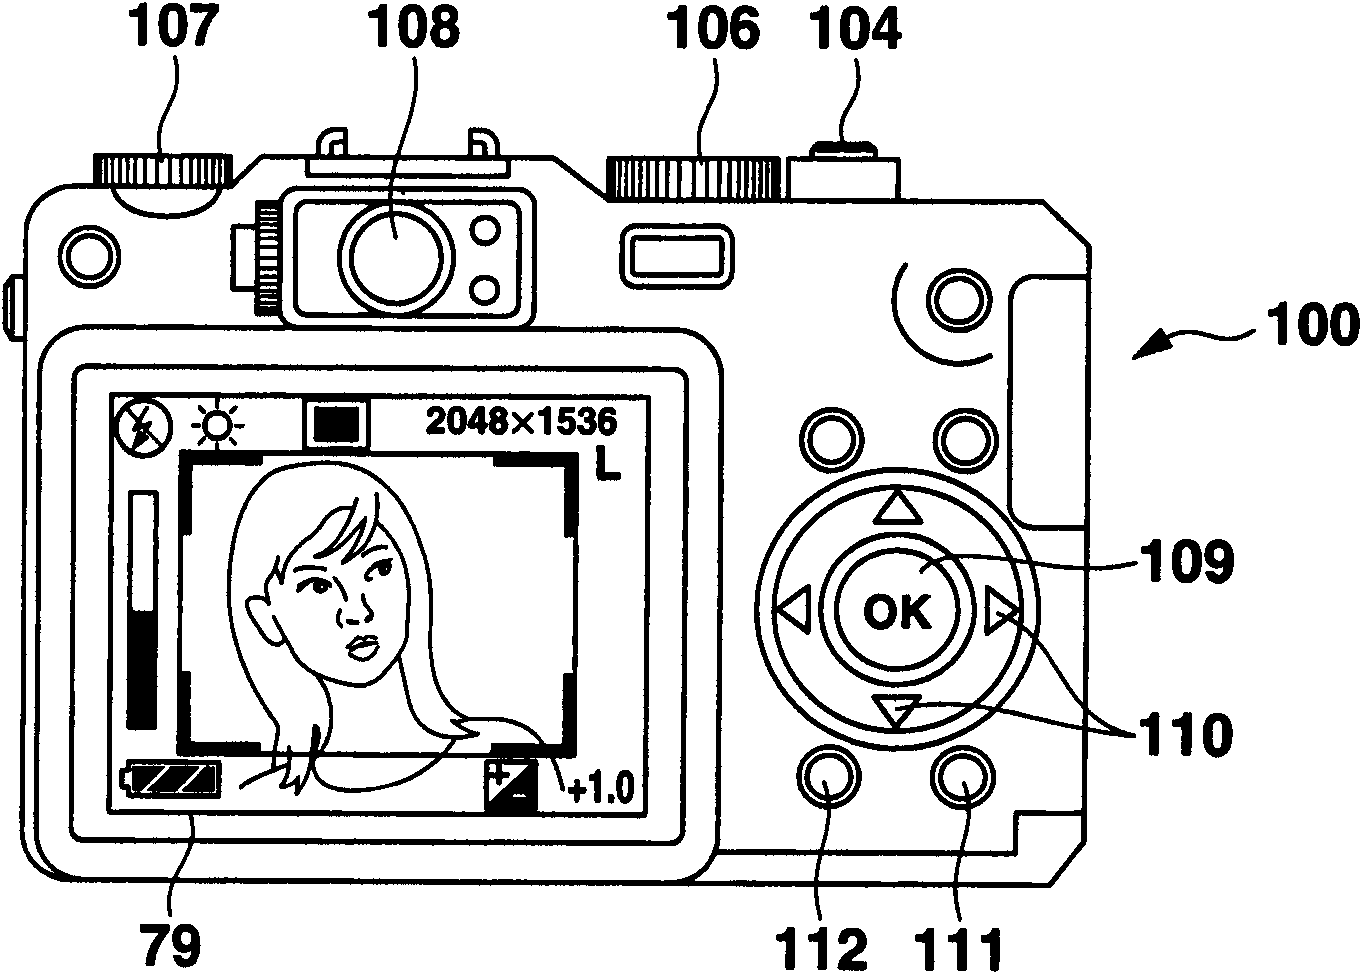 Image capturing apparatus capable of displaying live preview image